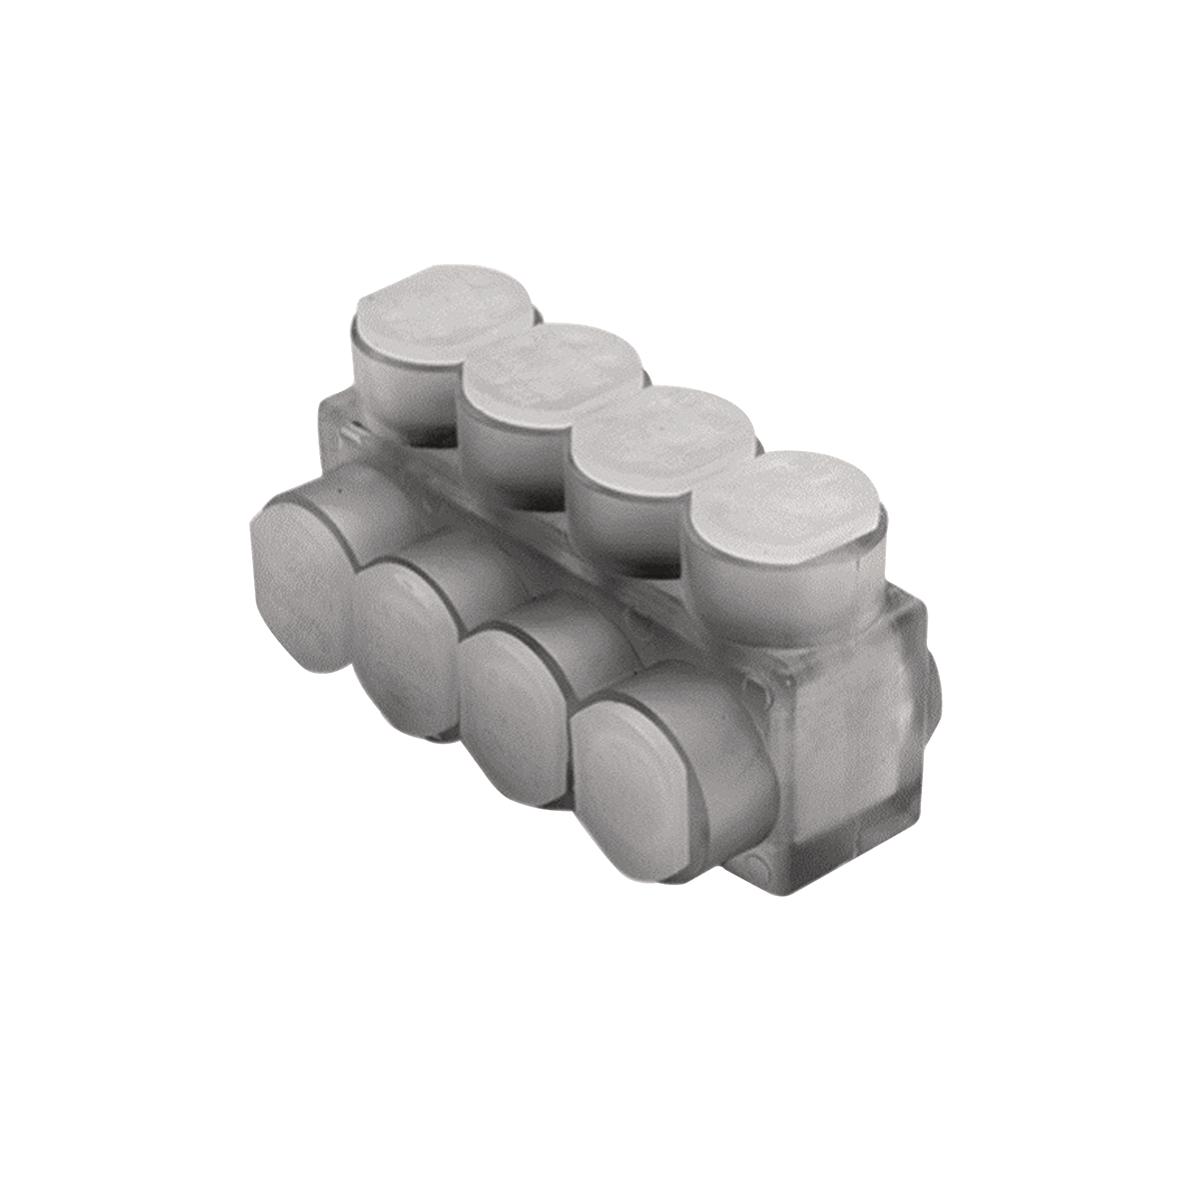 Hubbell BIBD2/012MT Aluminum Multiple Tap Connector W/ Mount Holes, Clear Insulated, 12 Port, 2 Sided Entry, 14-2/0 Awg, Al/Cu Rated. 